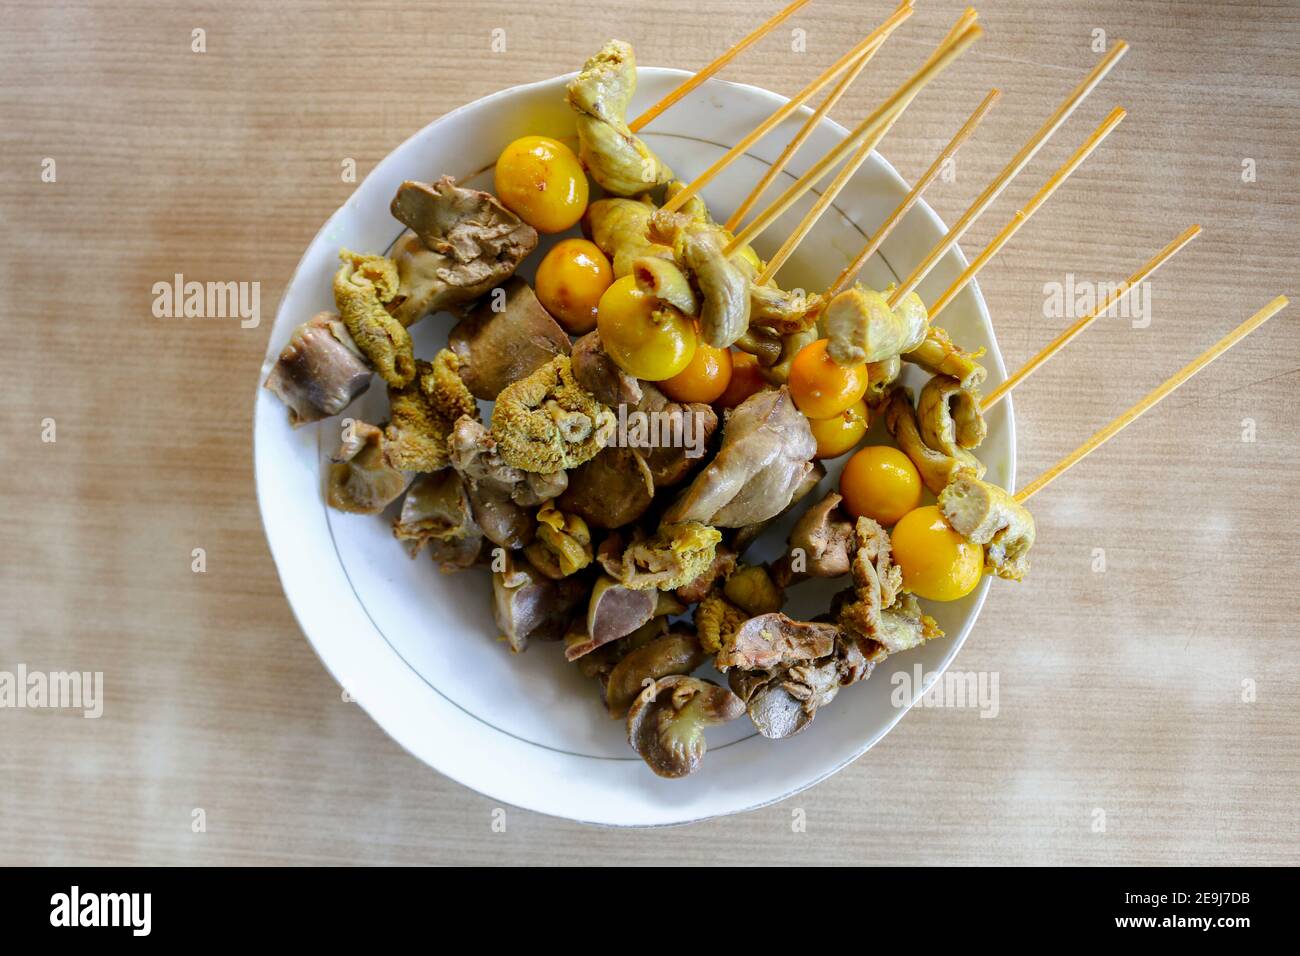 Sate jerohan or innards egg satay. Indonesian traditional food made from eggs and chicken. Stock Photo